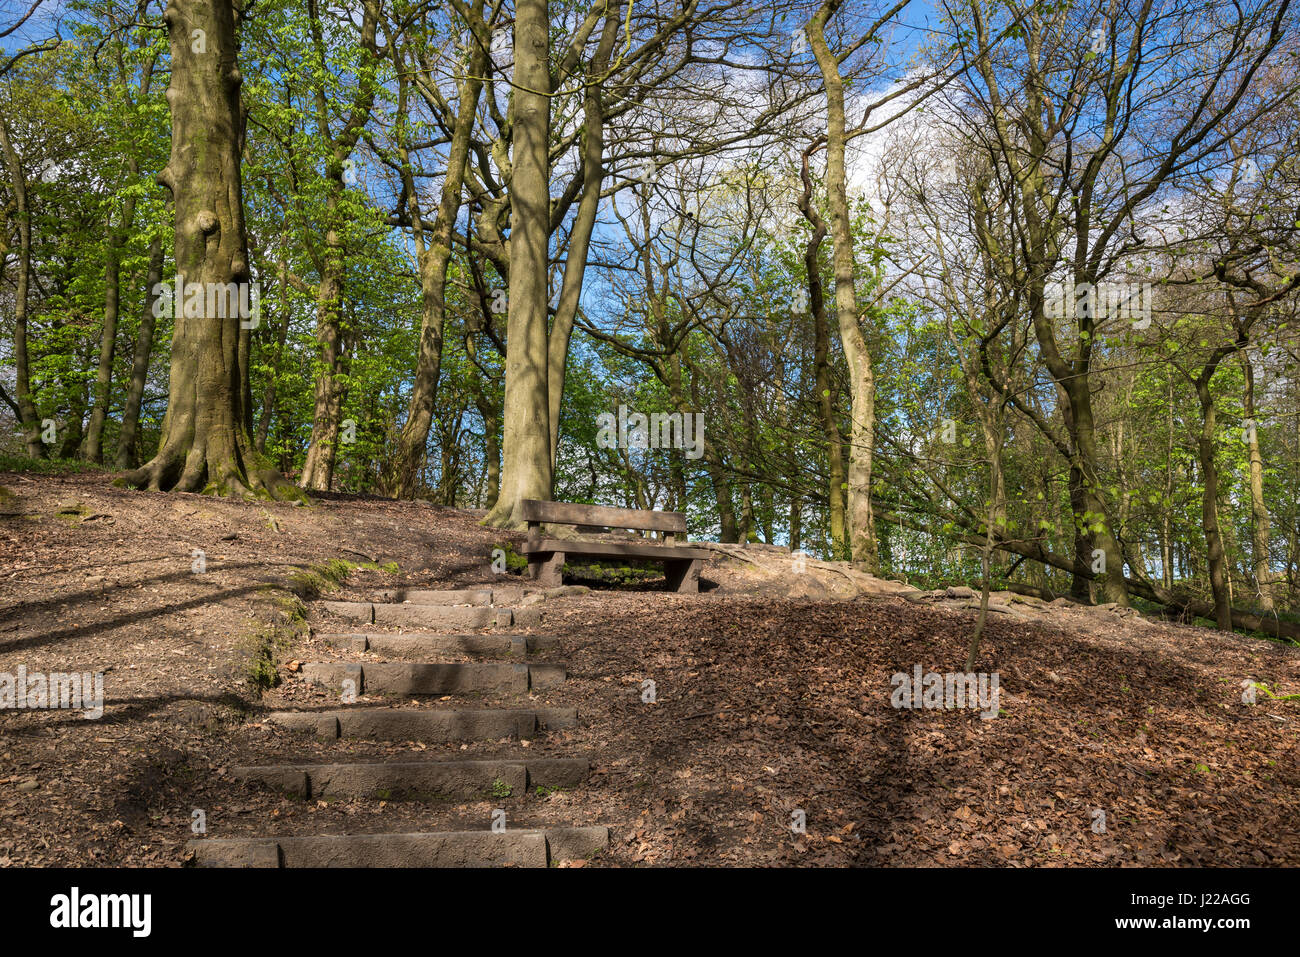 A spring day at Eastwood nature reserve, Stalybridge, Greater Manchester, England. Stock Photo